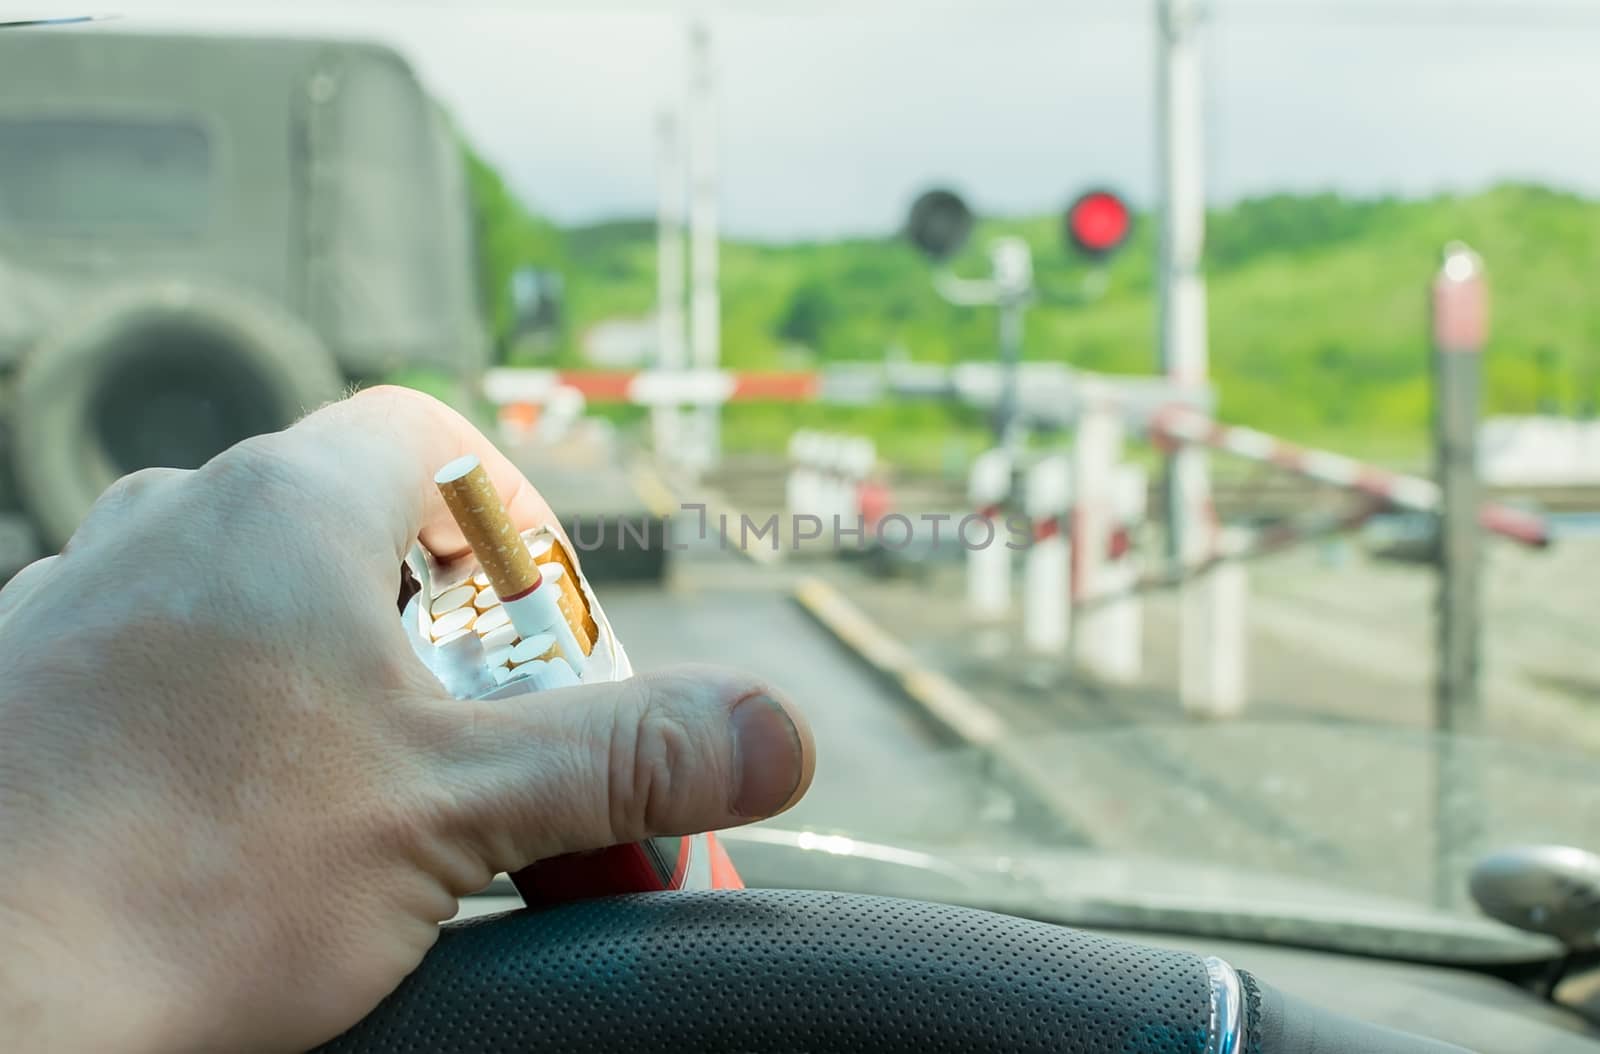 View of the driver hand with a pack of cigarettes on the steering wheel of the car, which stopped before a closed railway crossing at a red light by jk3030